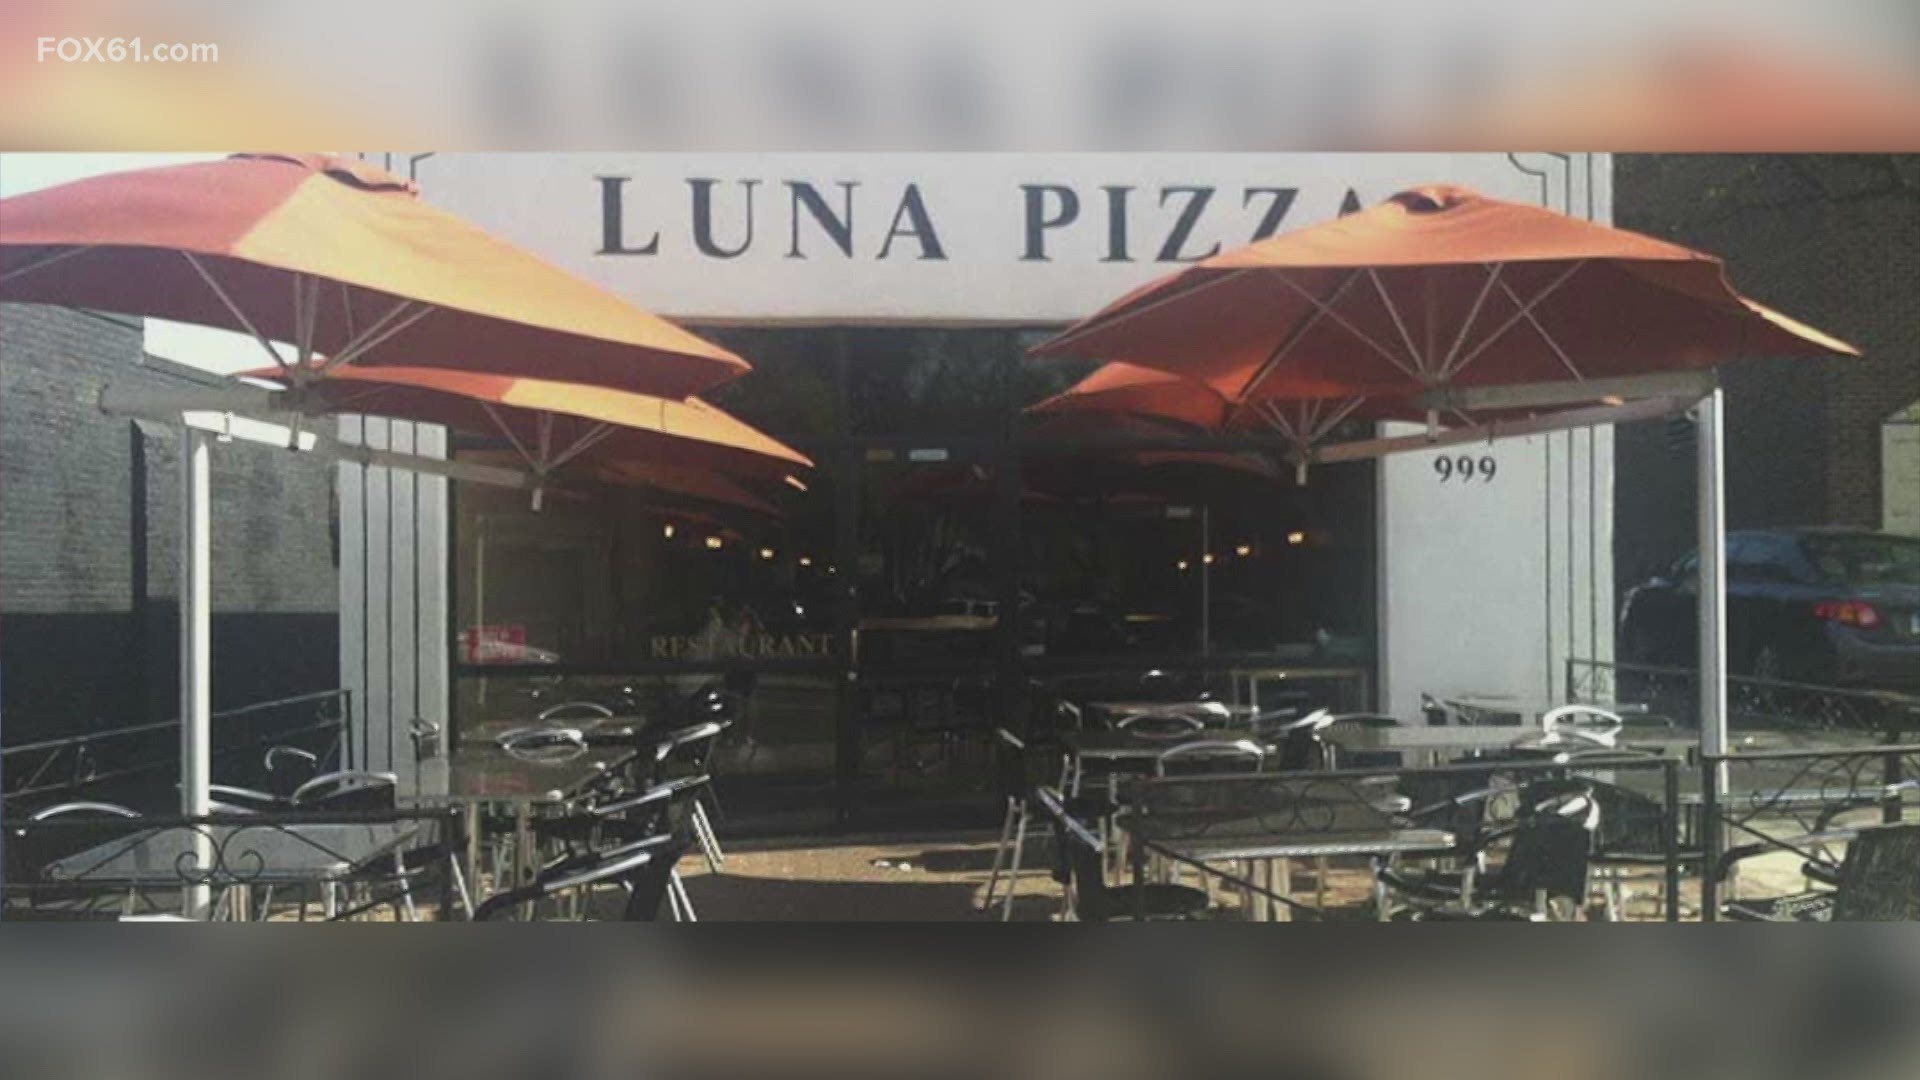 Luna Pizza, like many other restaurants in the area, has been following CDC and state guidelines when it comes to masks, hand washing, and hand sanitizer.